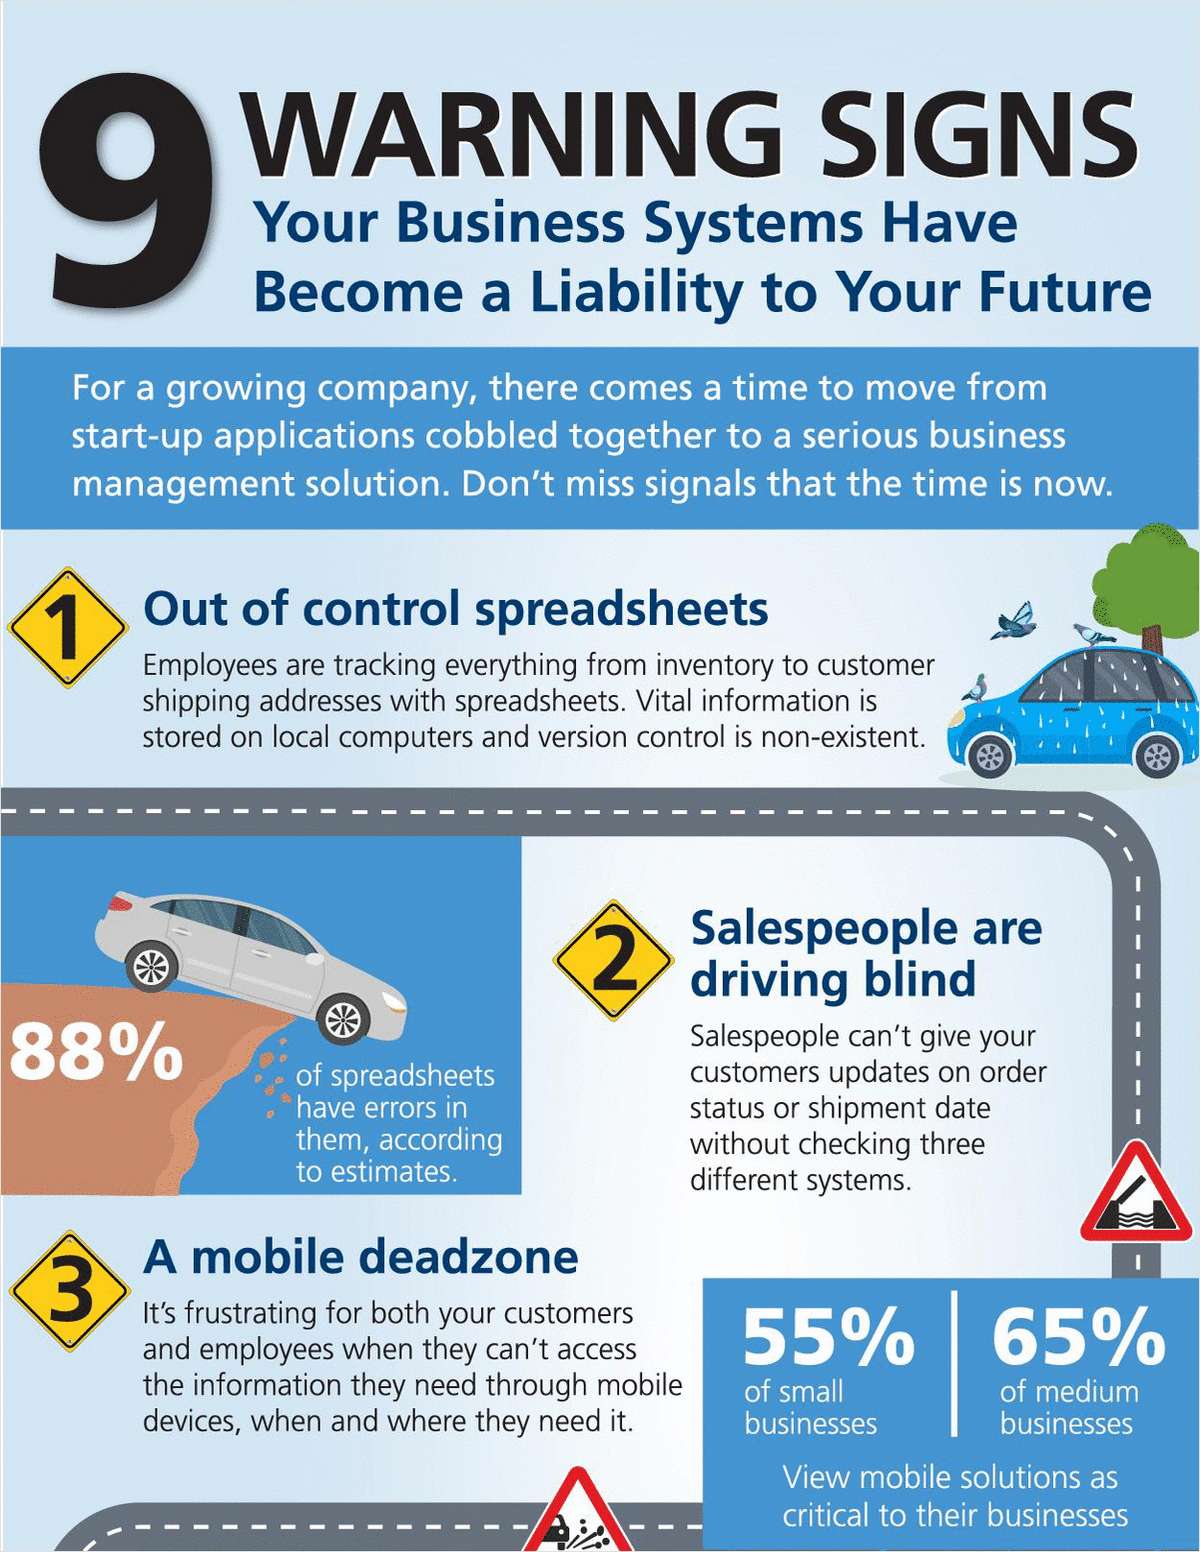 9 Warning Signs Your Business Systems Have Become a Liability to Your Future